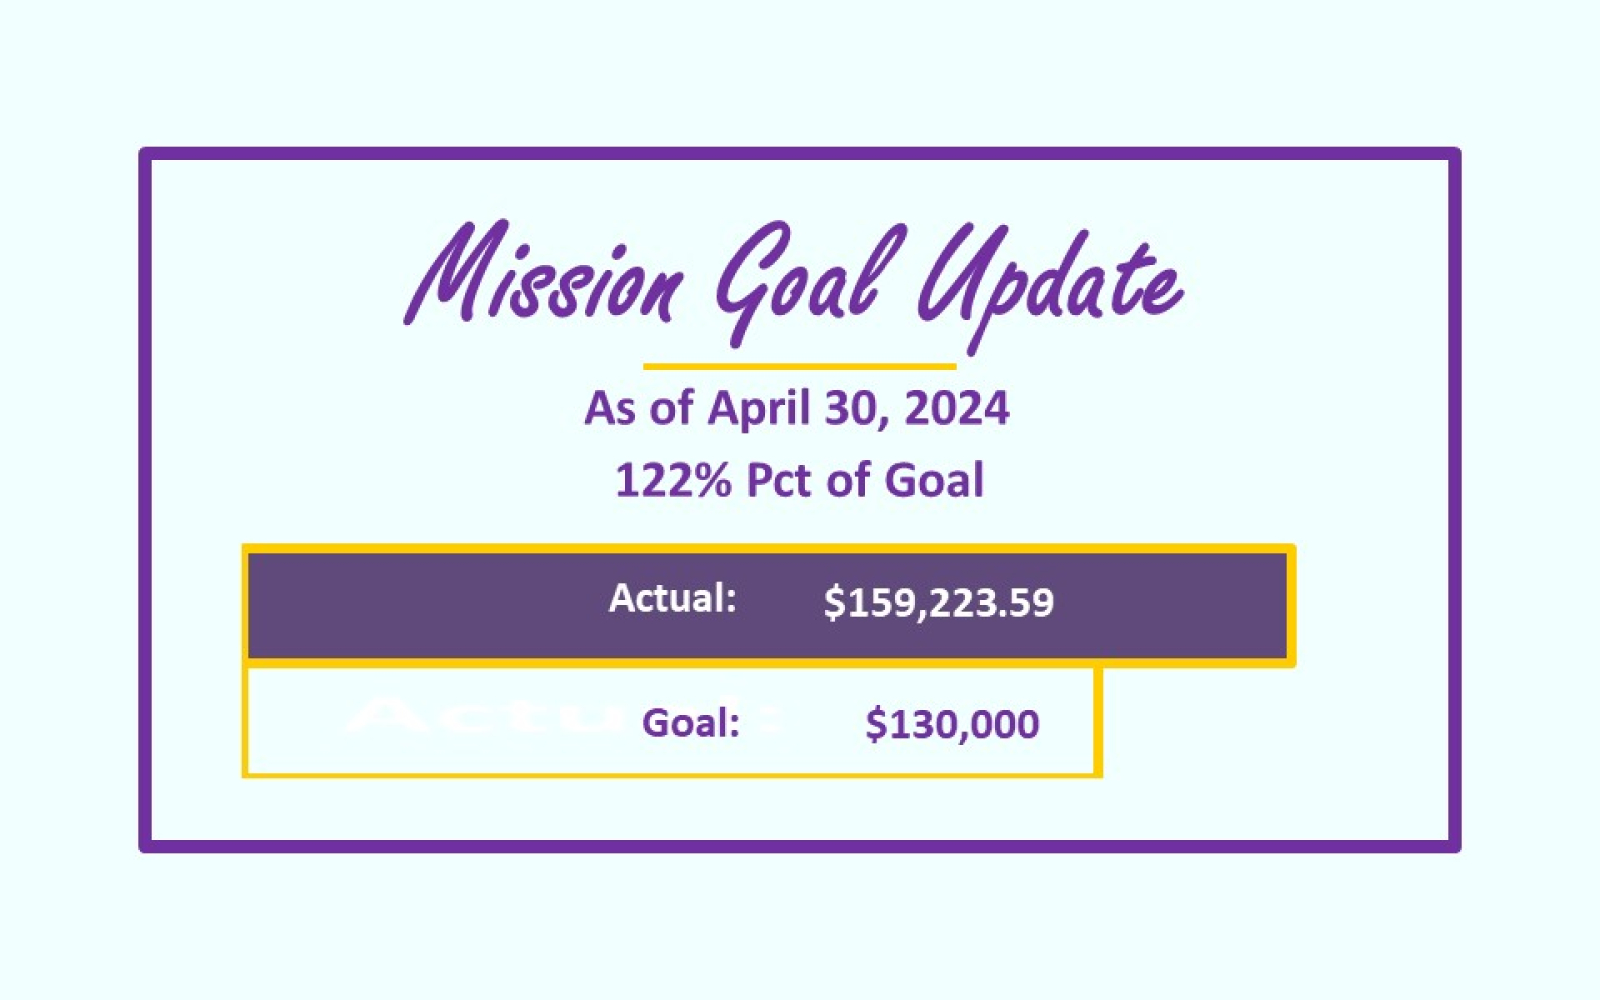 We've exceeded our goal by almost $30,000! Praise the Lord!